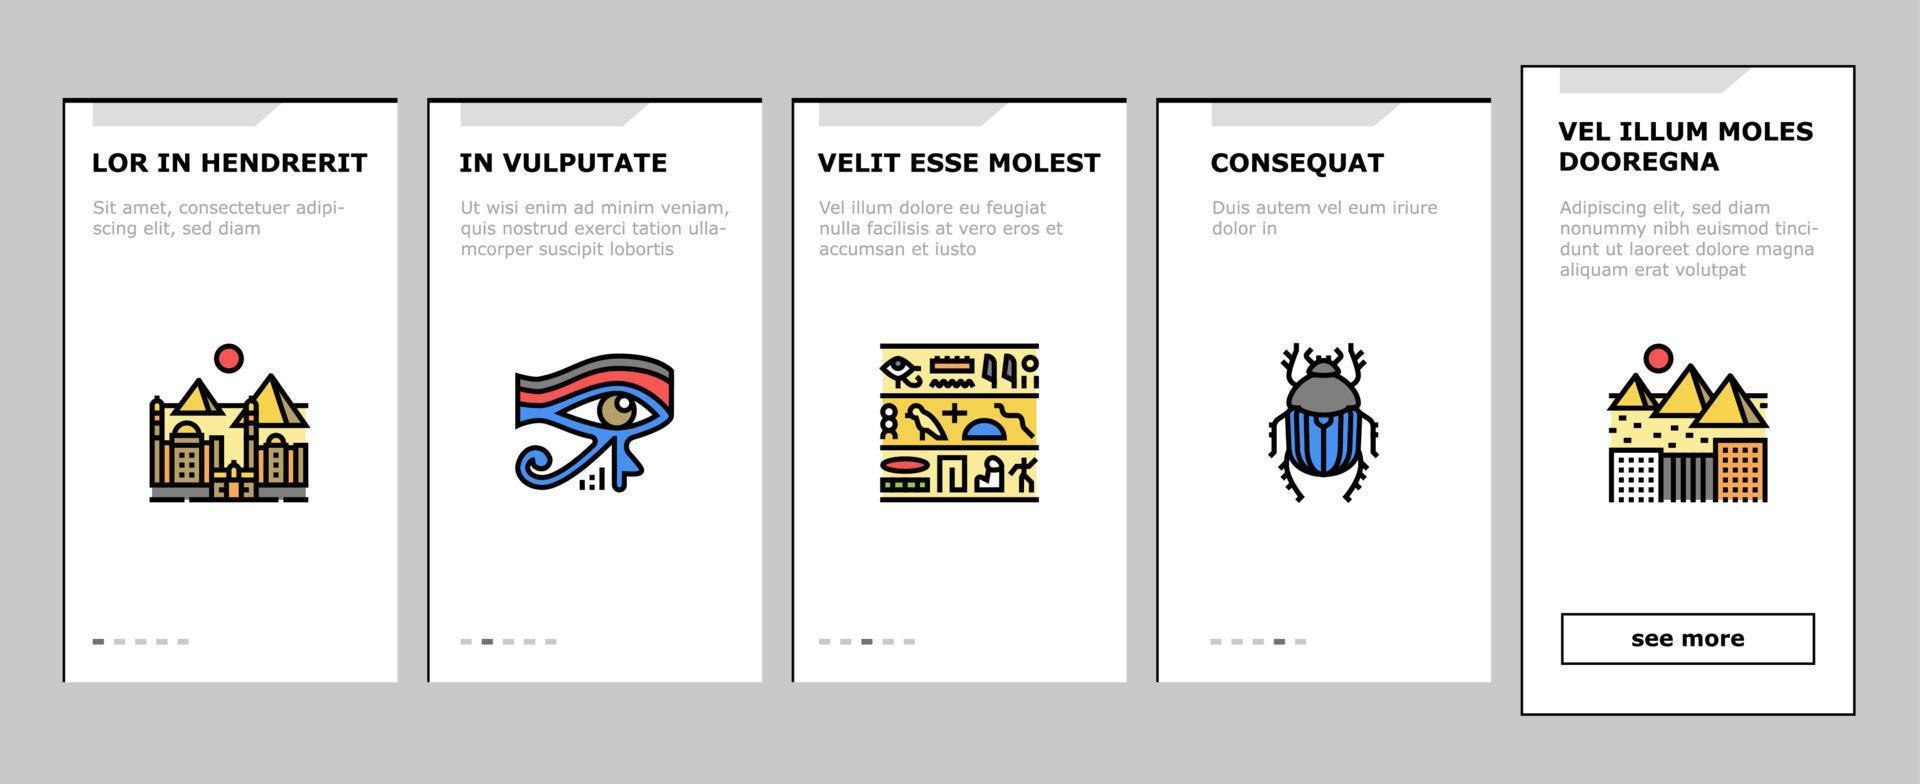 egypte pays monument excursion onboarding icons set vector